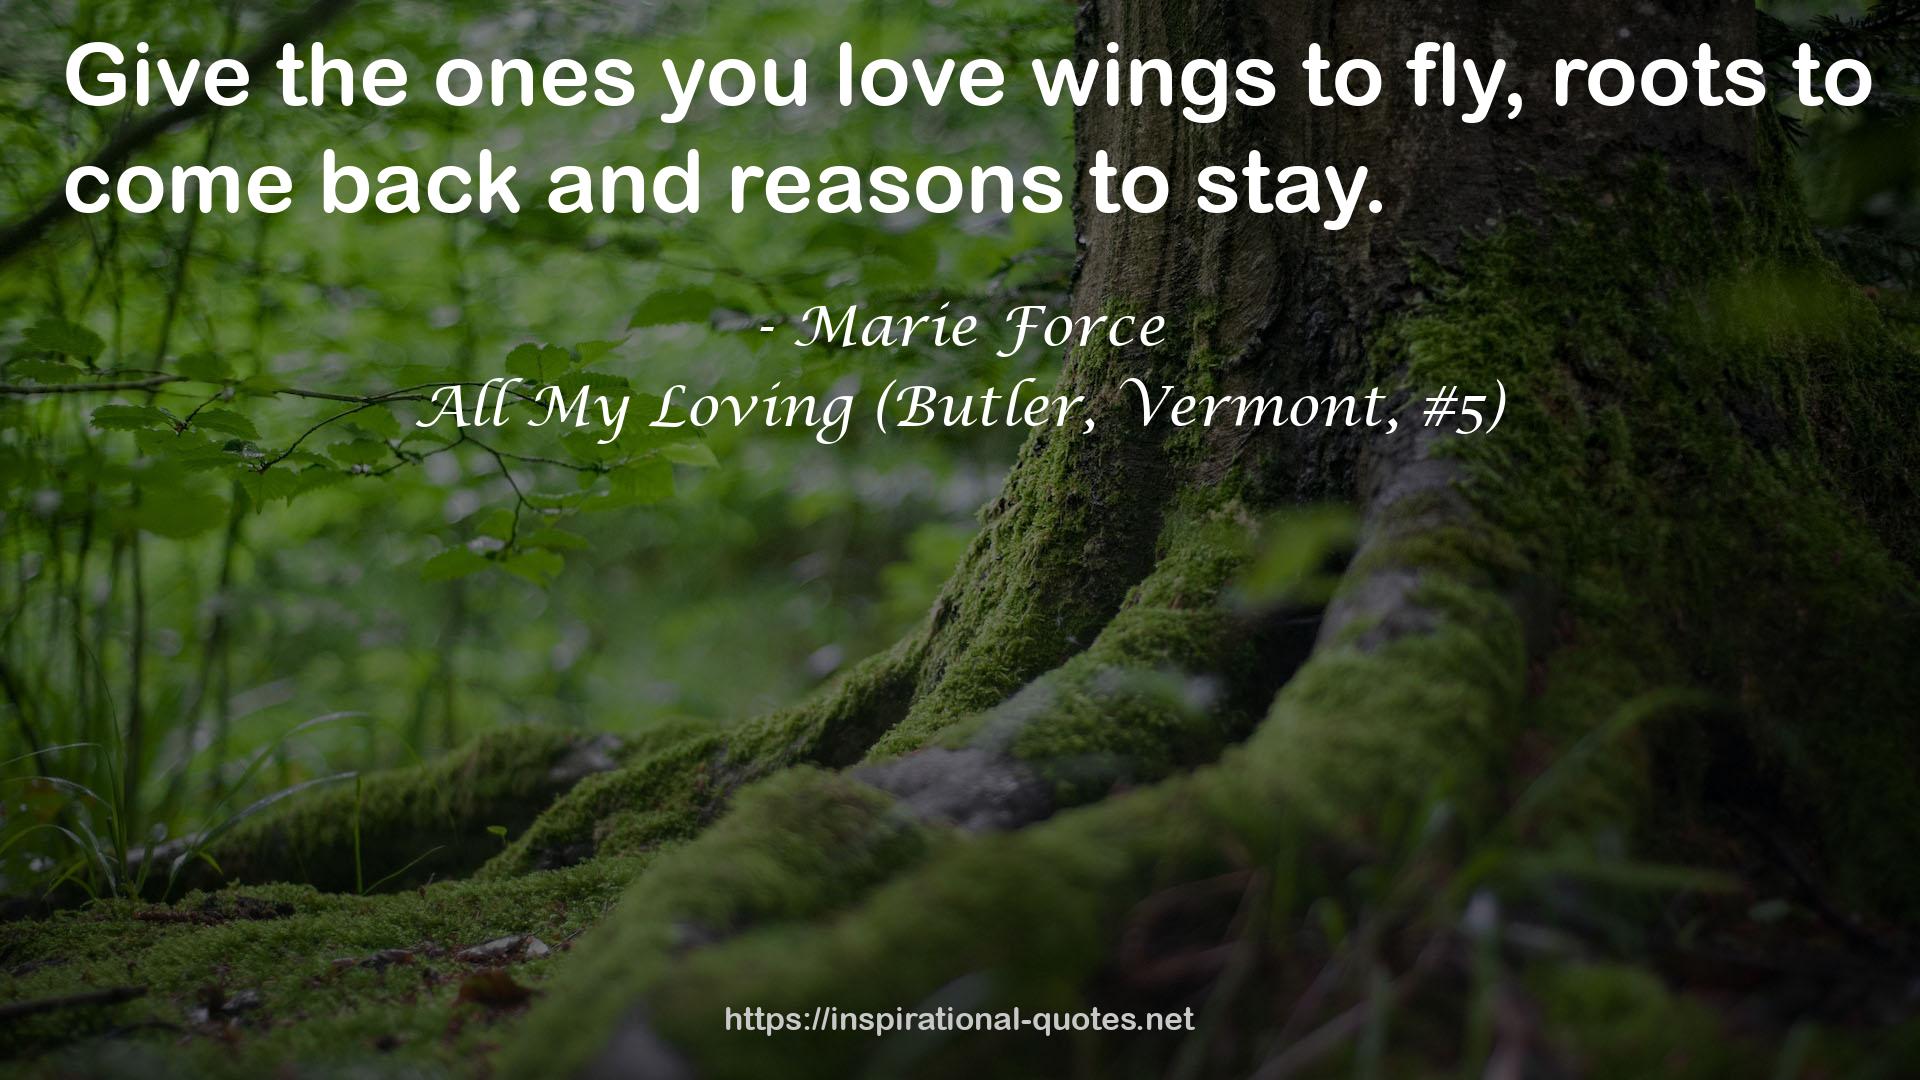 All My Loving (Butler, Vermont, #5) QUOTES